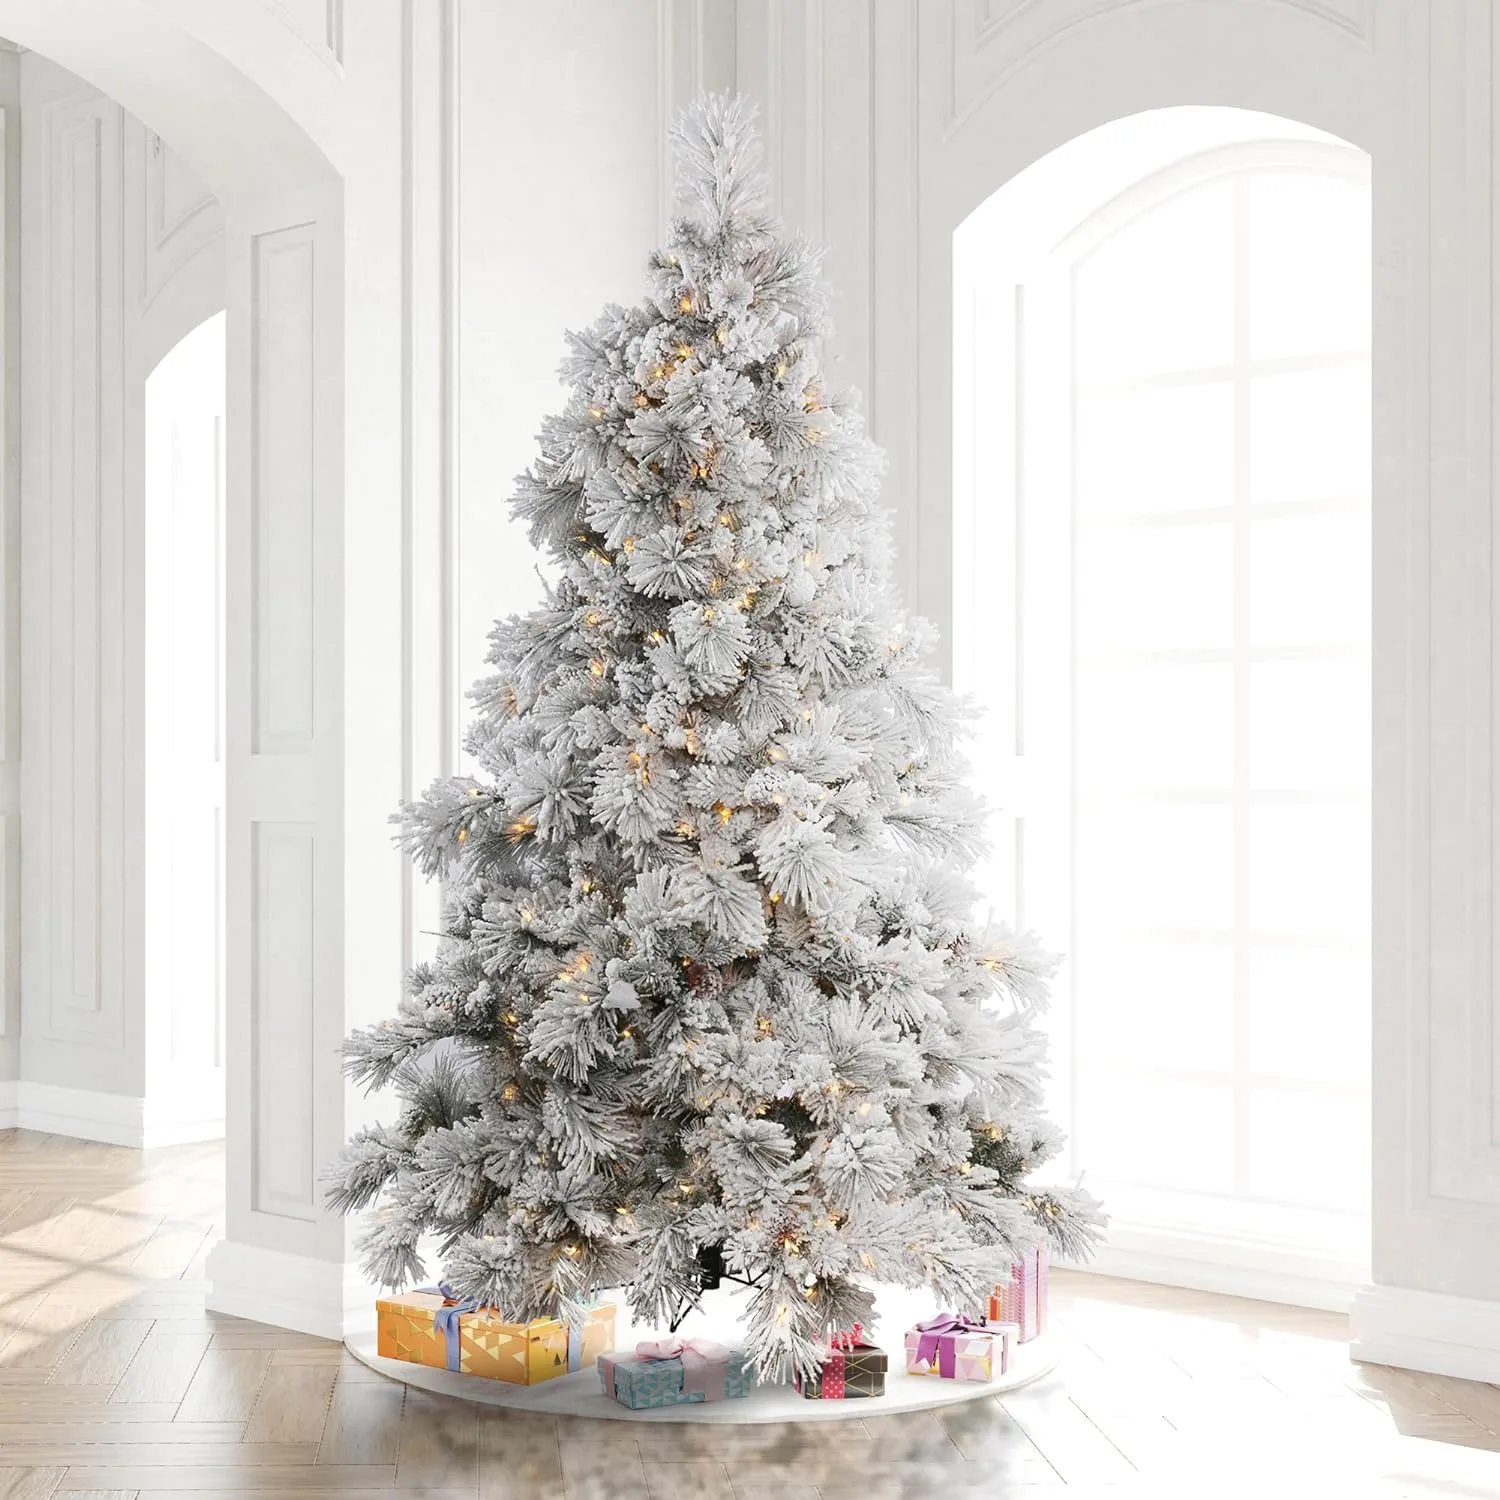 Decorate Christmas tree Beautifully and Professionally